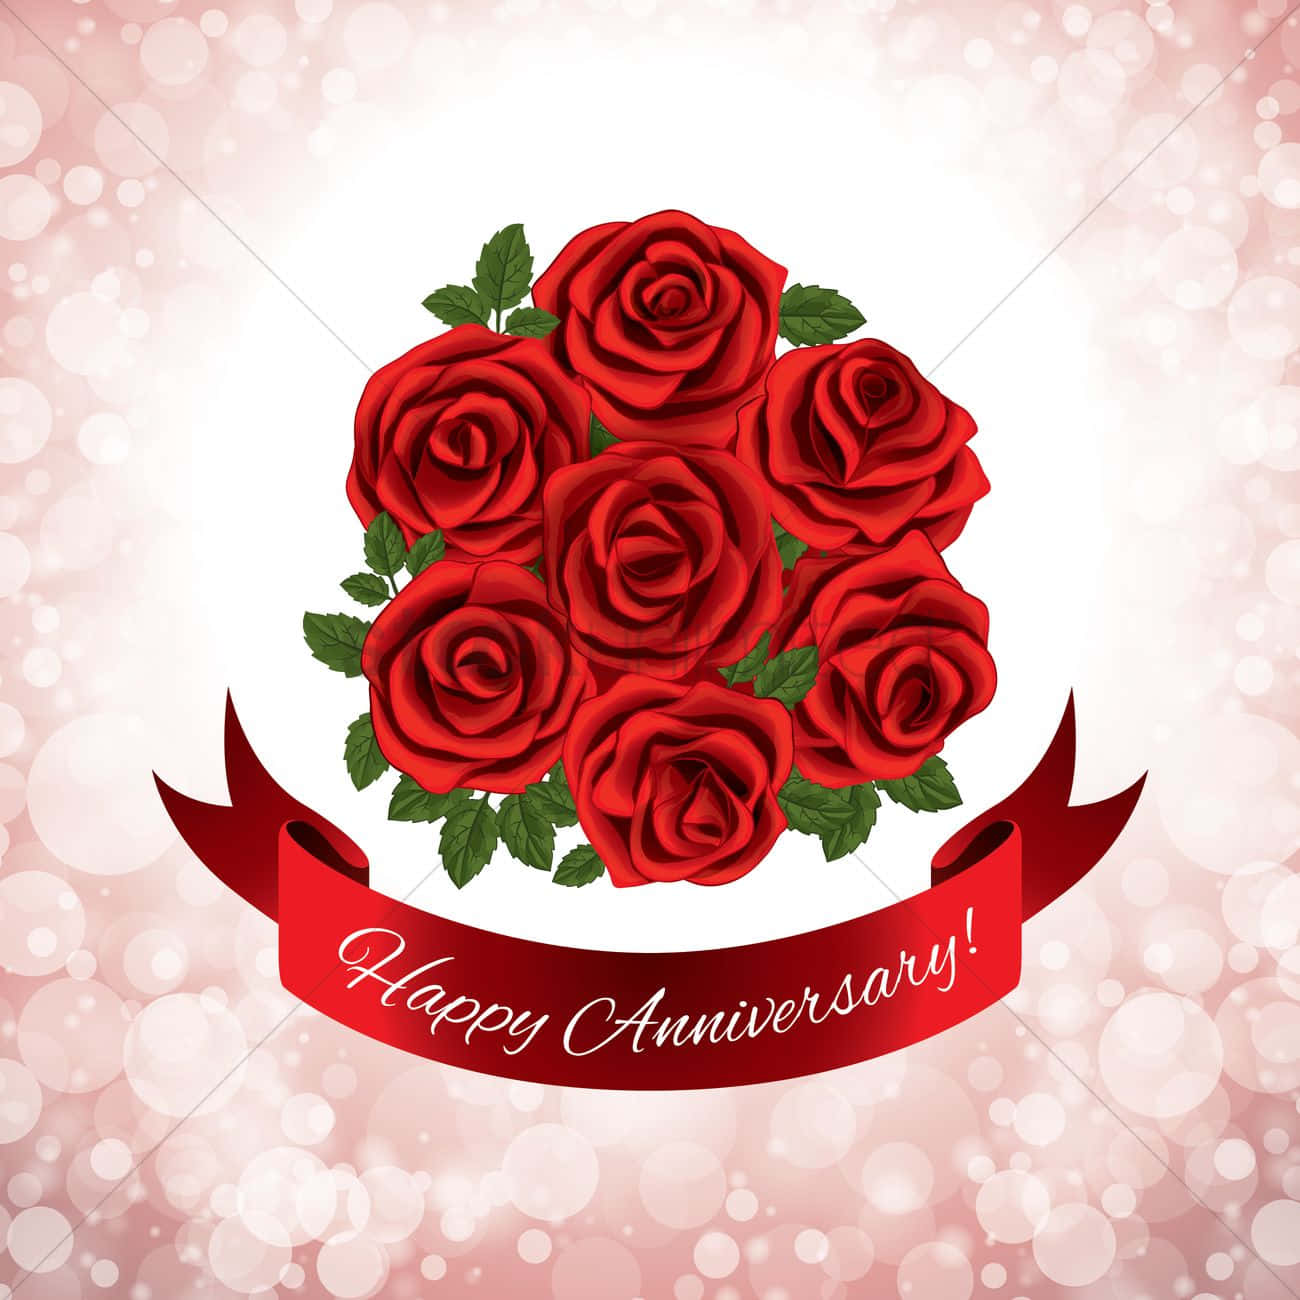 Anniversary Bouquet Of Red Roses Wallpaper